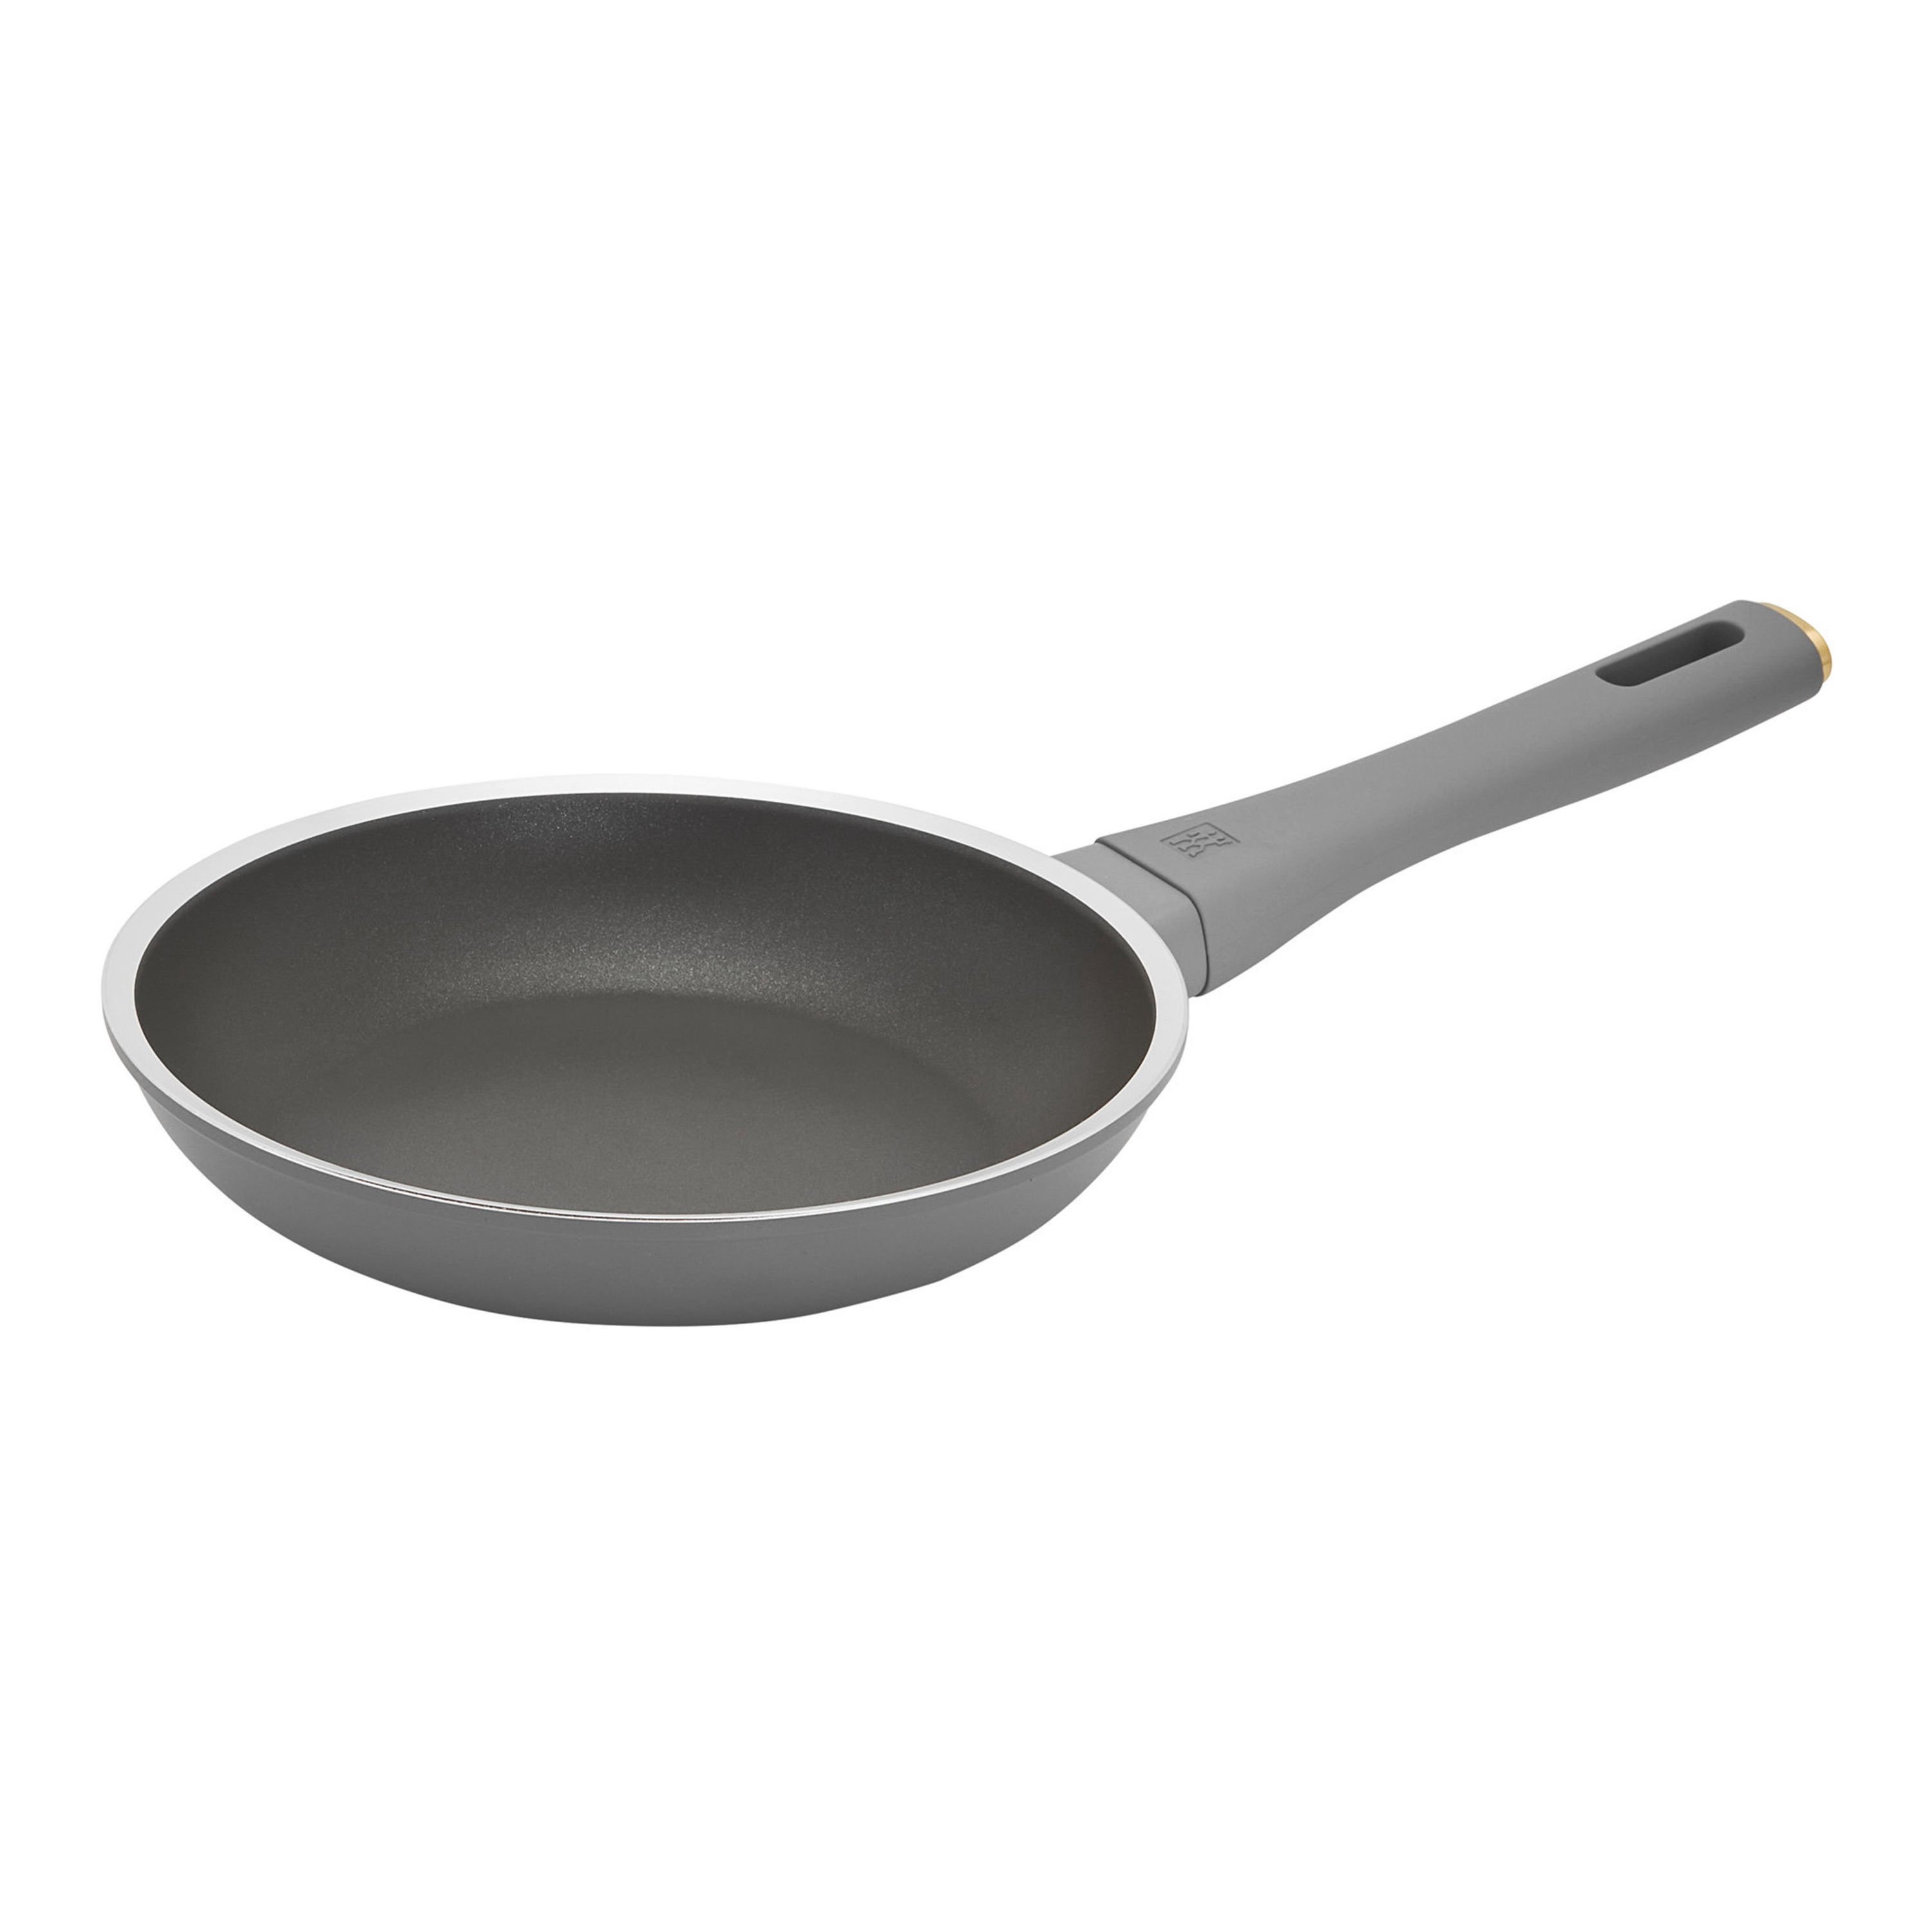 Zwilling Madura Plus Non-Stick Pan: The Only Non-Stick Pan You